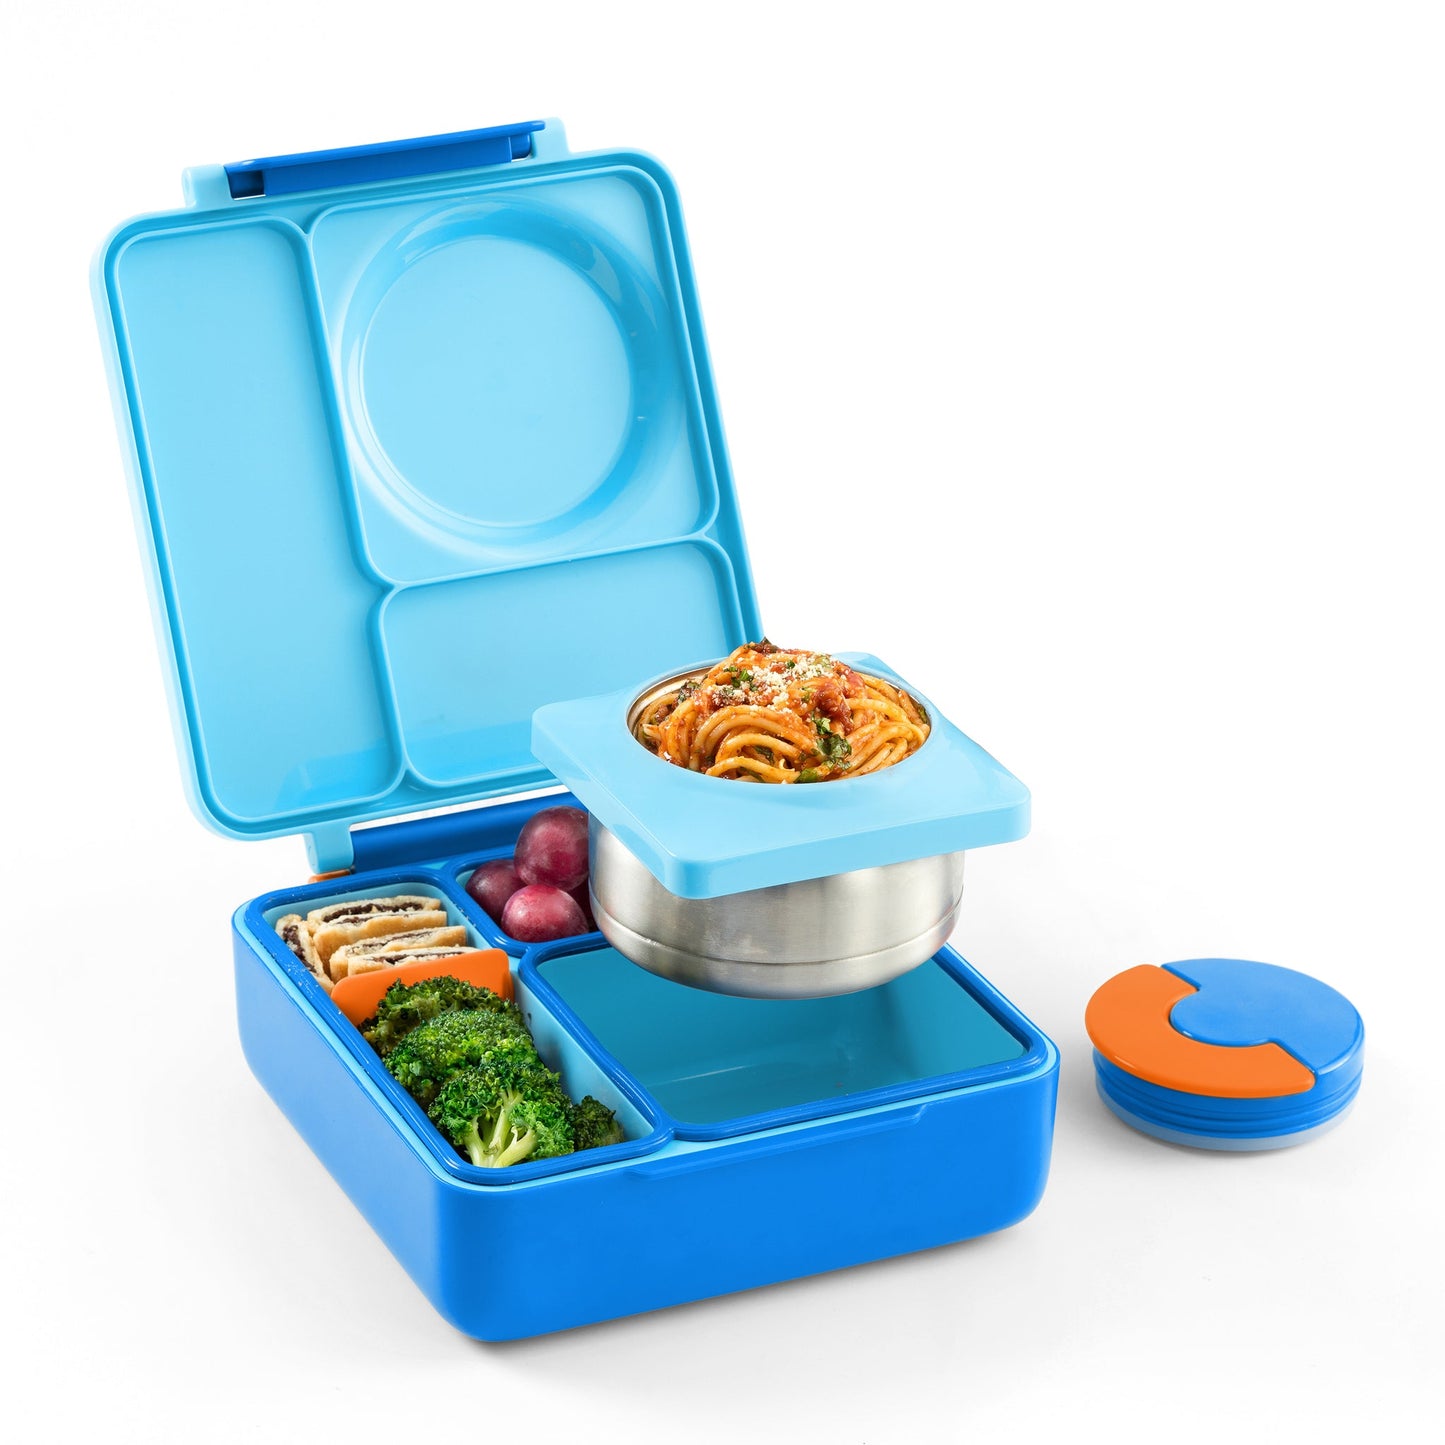 Hot & Cold Bento Lunchbox - Blue Sky - Little Reef and Friends